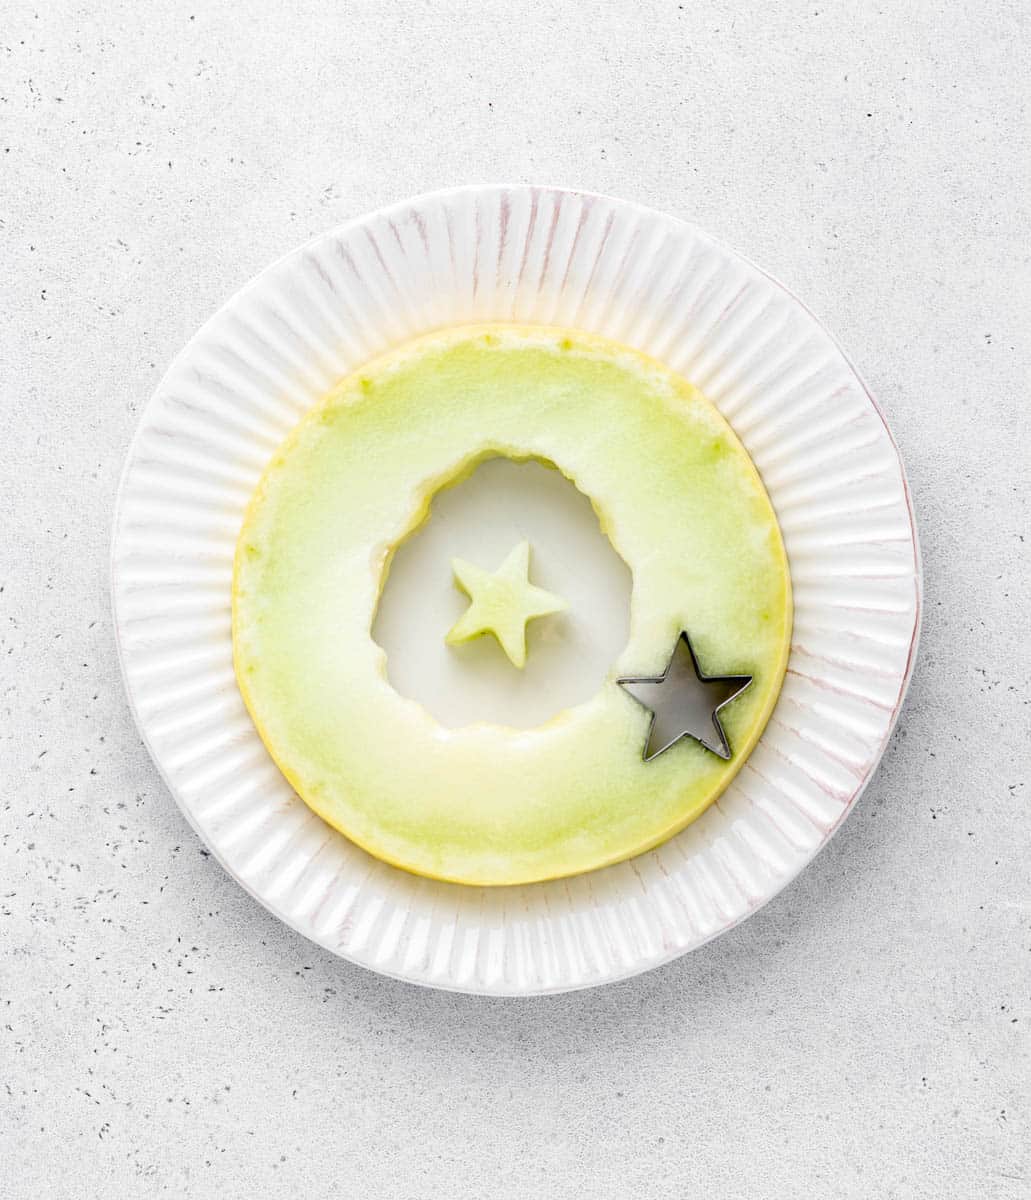 A circular slice of honey melon has a star shape cut out of it.